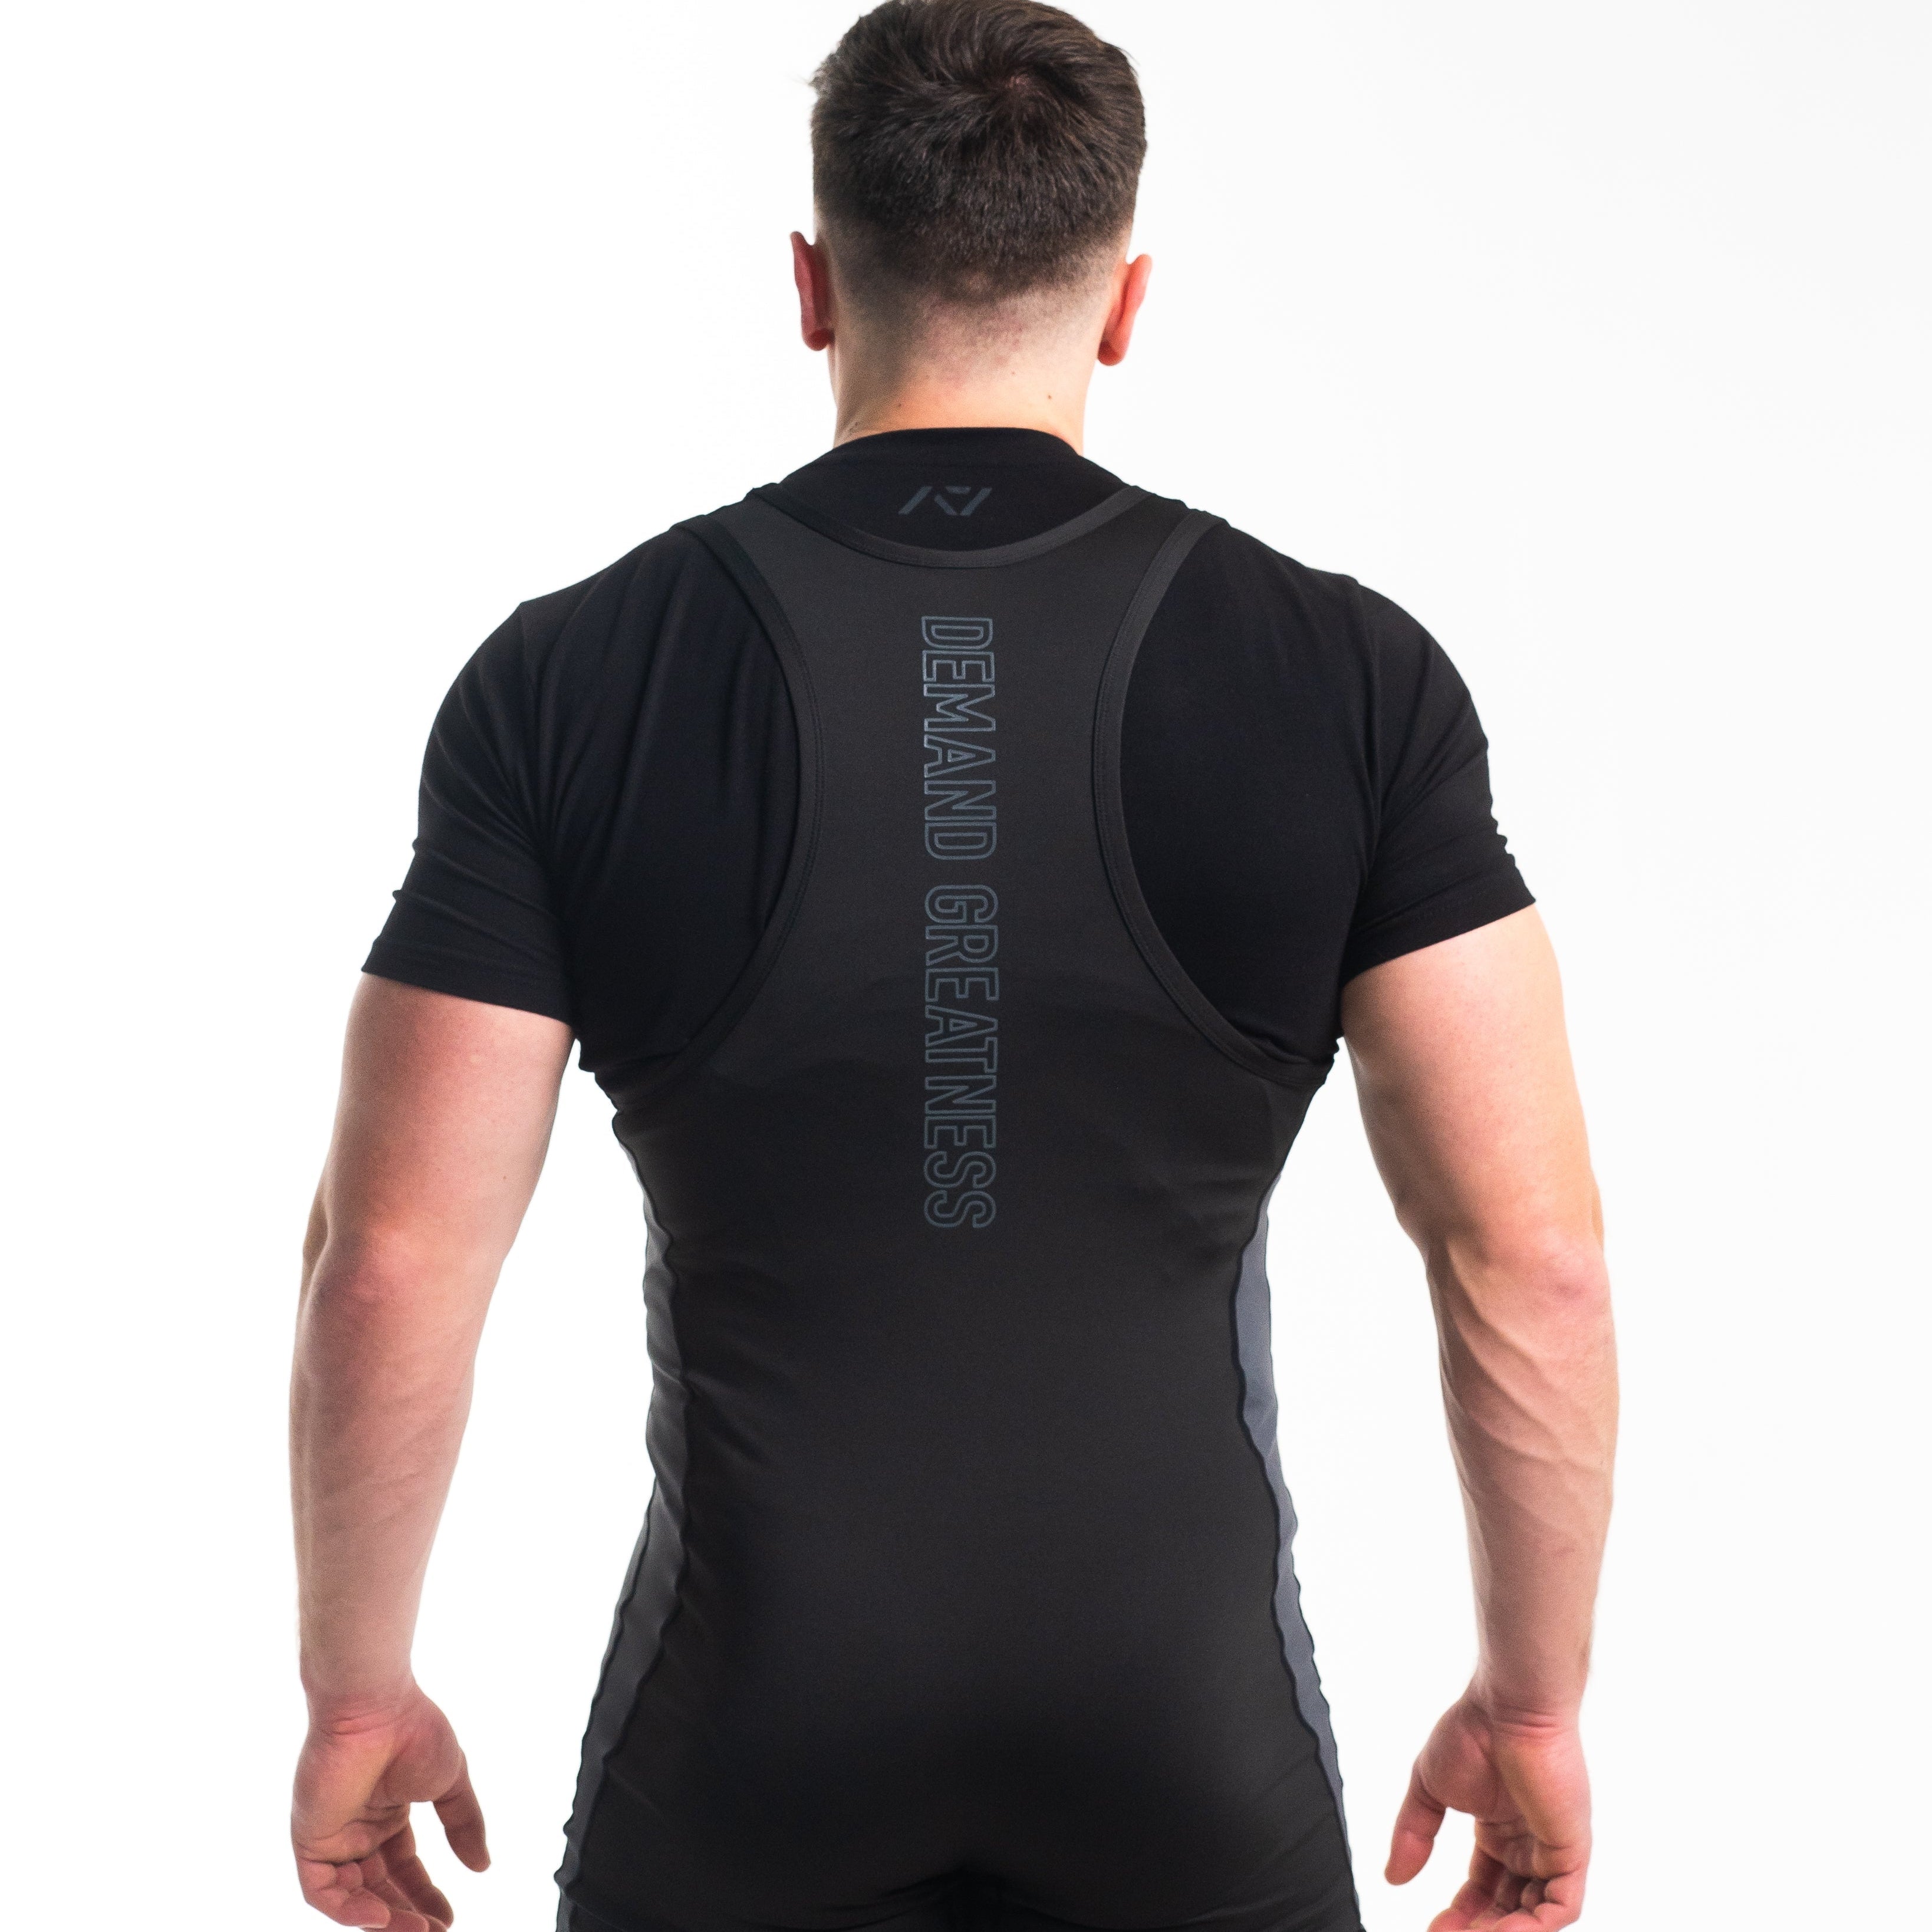 A7 IPF Approved Shadow Stone Luno singlet with extra lat mobility, side panel stitching to guide the squat depth level and curved panel design for a slimming look. The Women's singlet features a tapered waist and additional quad room. The IPF Approved Kit includes Powerlifting Singlet, A7 Meet Shirt, A7 Zebra Wrist Wraps, A7 Deadlift Socks, Hourglass Knee Sleeves (Stiff Knee Sleeves and Rigor Mortis Knee Sleeves). Genouillères powerlifting shipping to France, Spain, Ireland, Germany, Italy, Sweden and EU. 